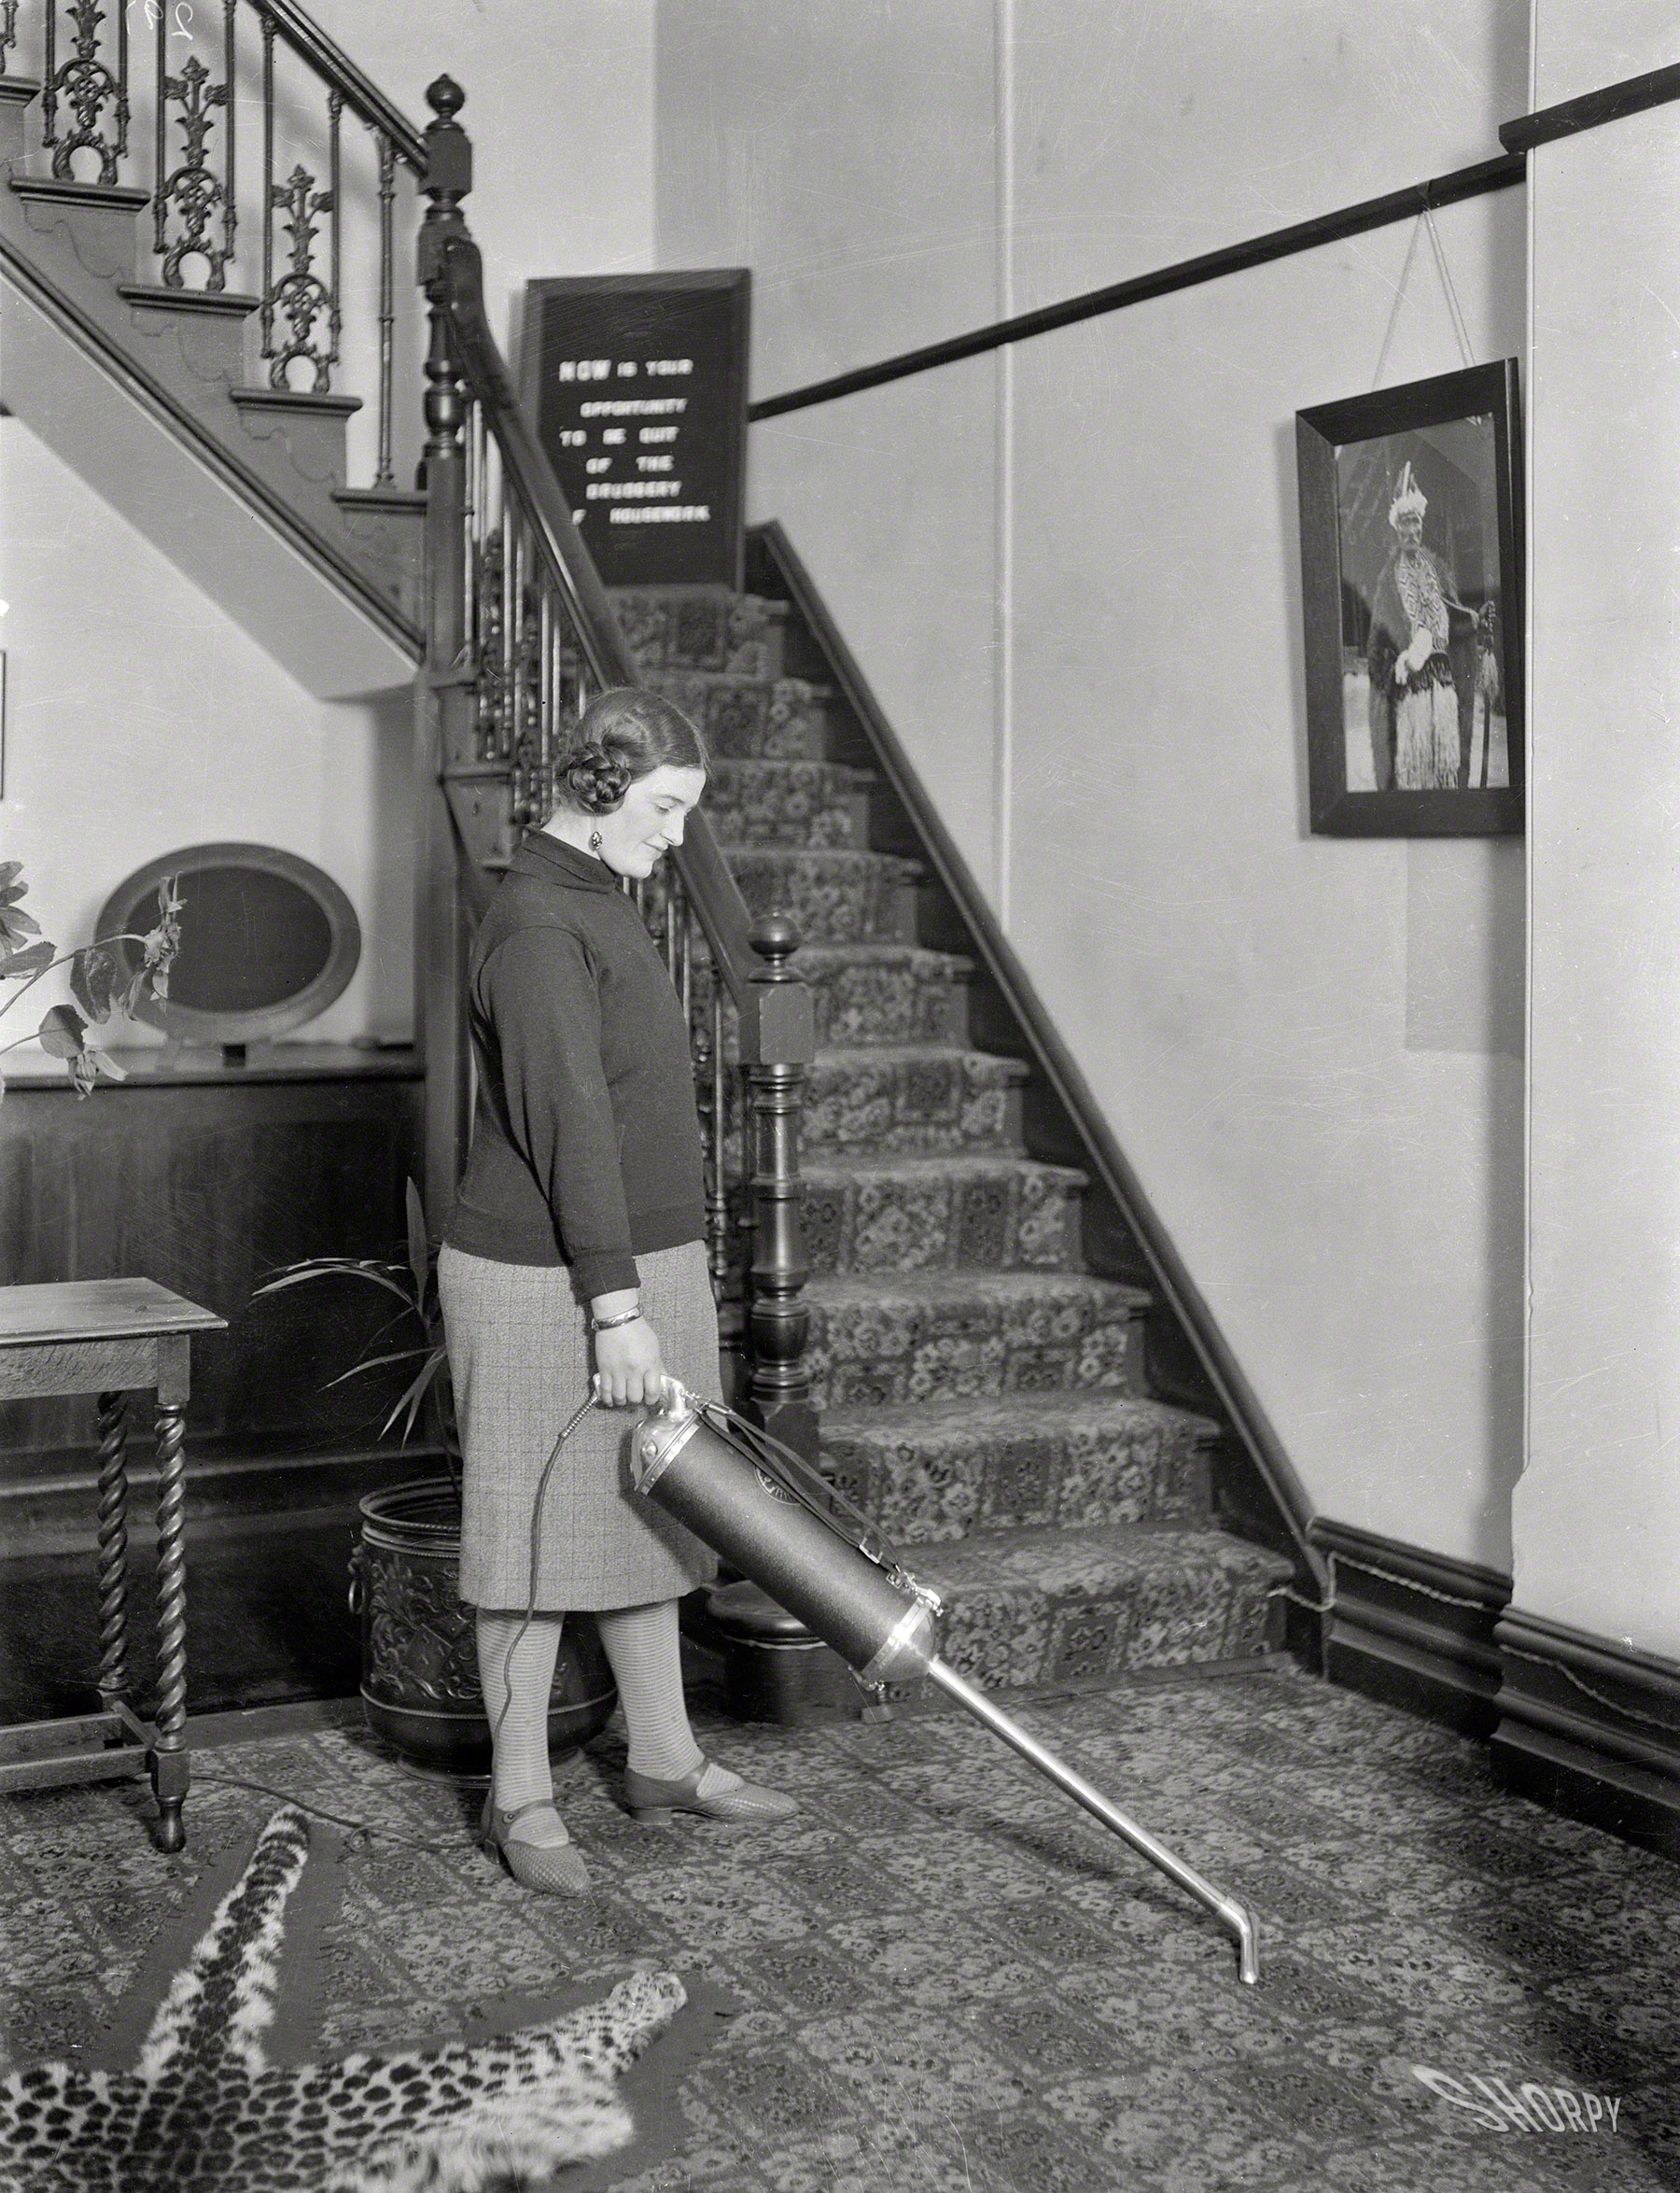 Wellington, New Zealand. "Woman using a vacuum cleaner in a hallway, photographed early 1930s by Gordon Burt." Sign on the landing: "NOW is the opportunity to be quit of the DRUDGERY of housework." View full size.